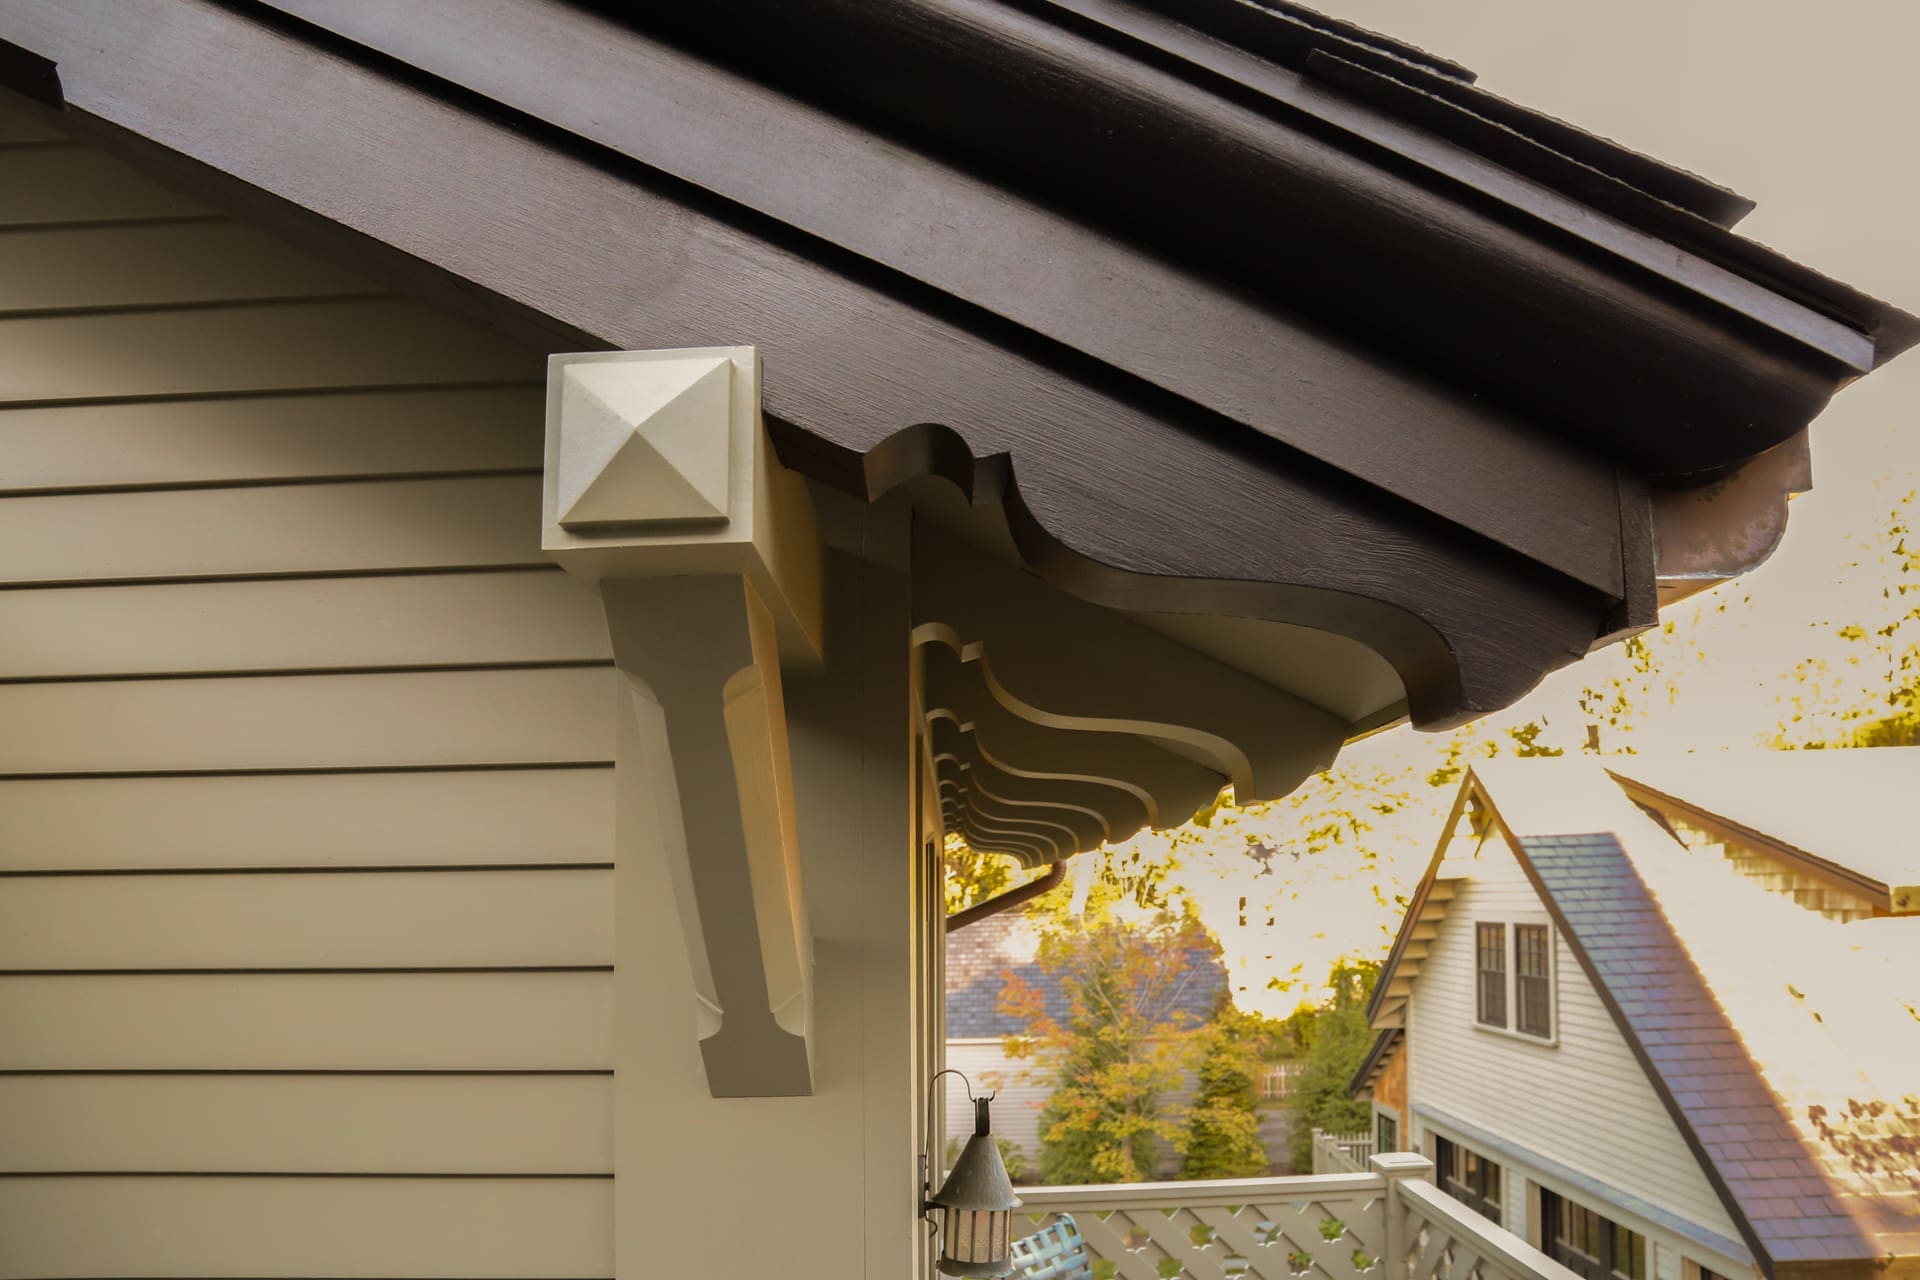 A photo of grey-green painted roof eaves and bracket.